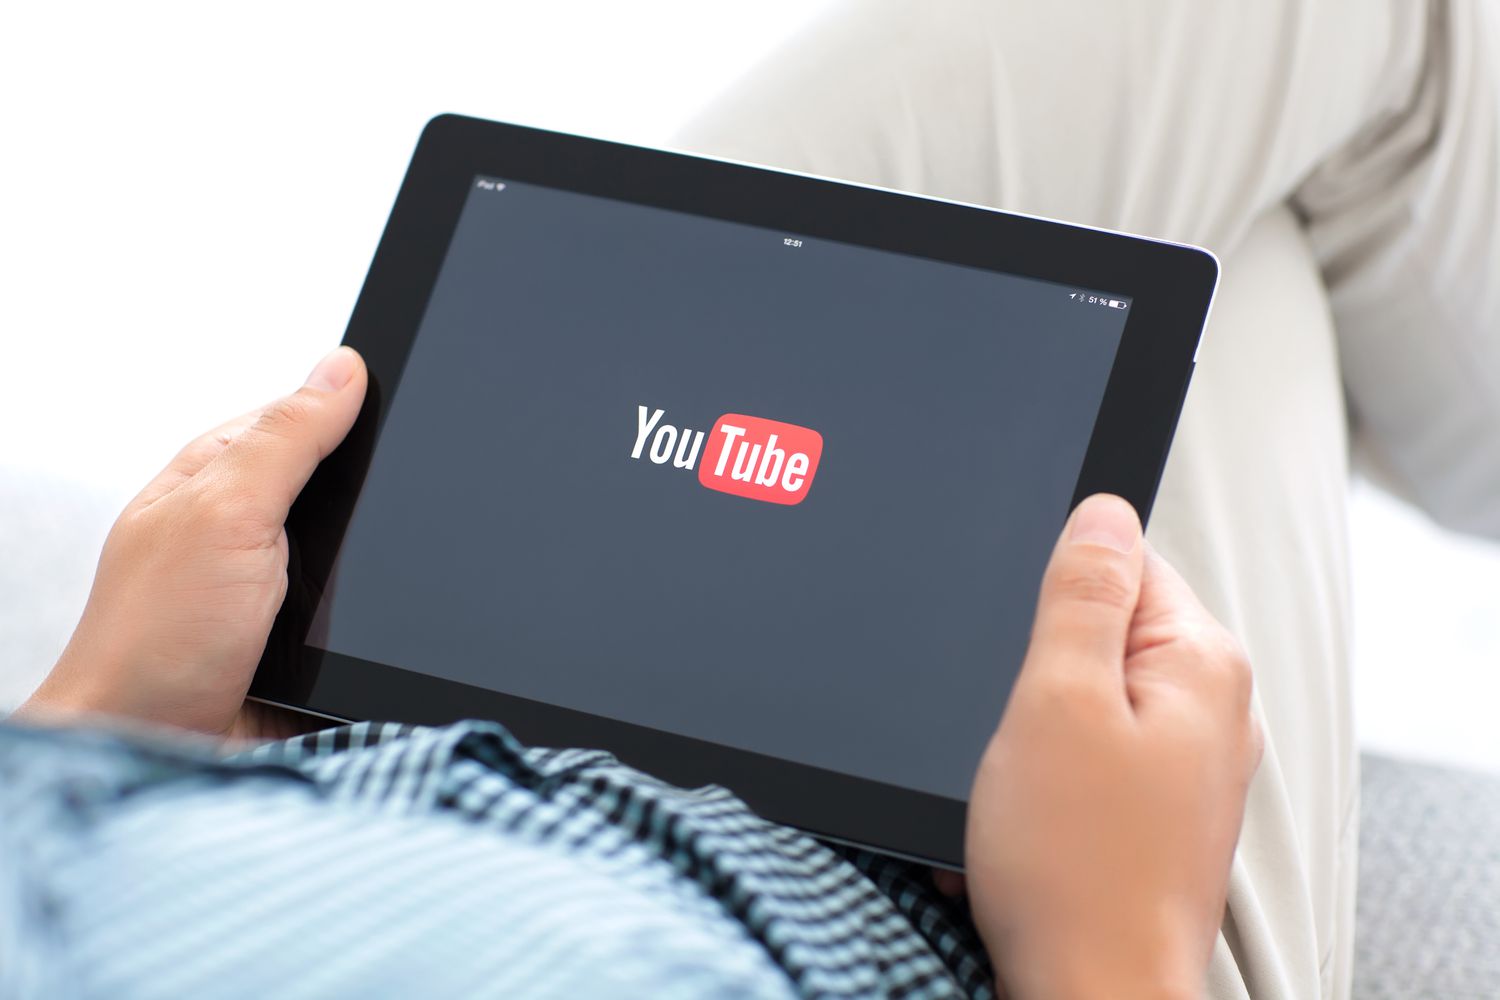 man holding ipad with app youtube on the screen 502558347 f98e061798f546ab8245d13686ed3acc